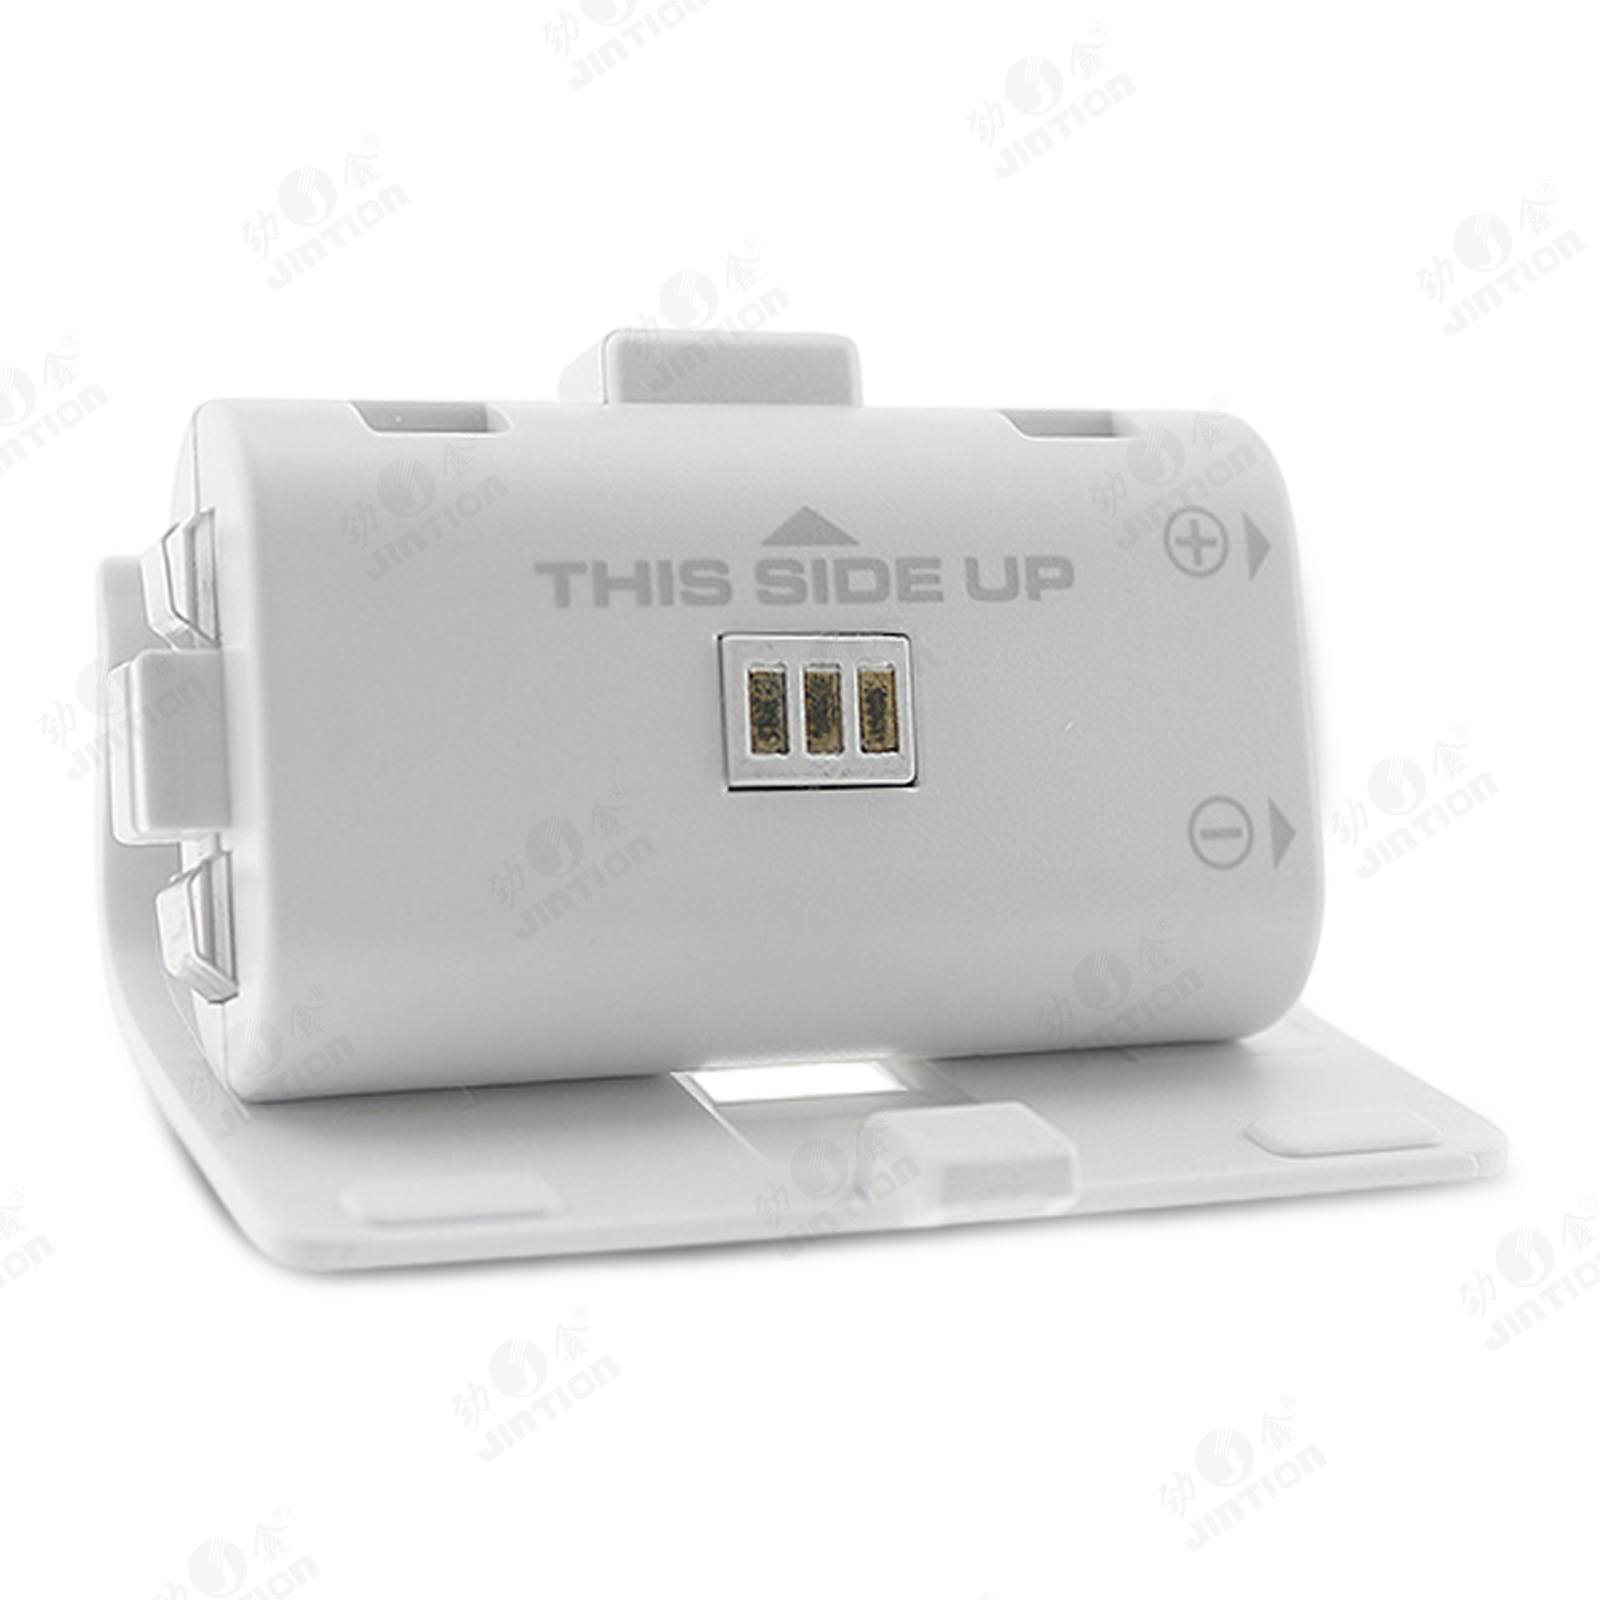 JINTION NiMh B 1200mAh 2.4v for micro usb charging on the back of the XBOX ONE controller battery pack